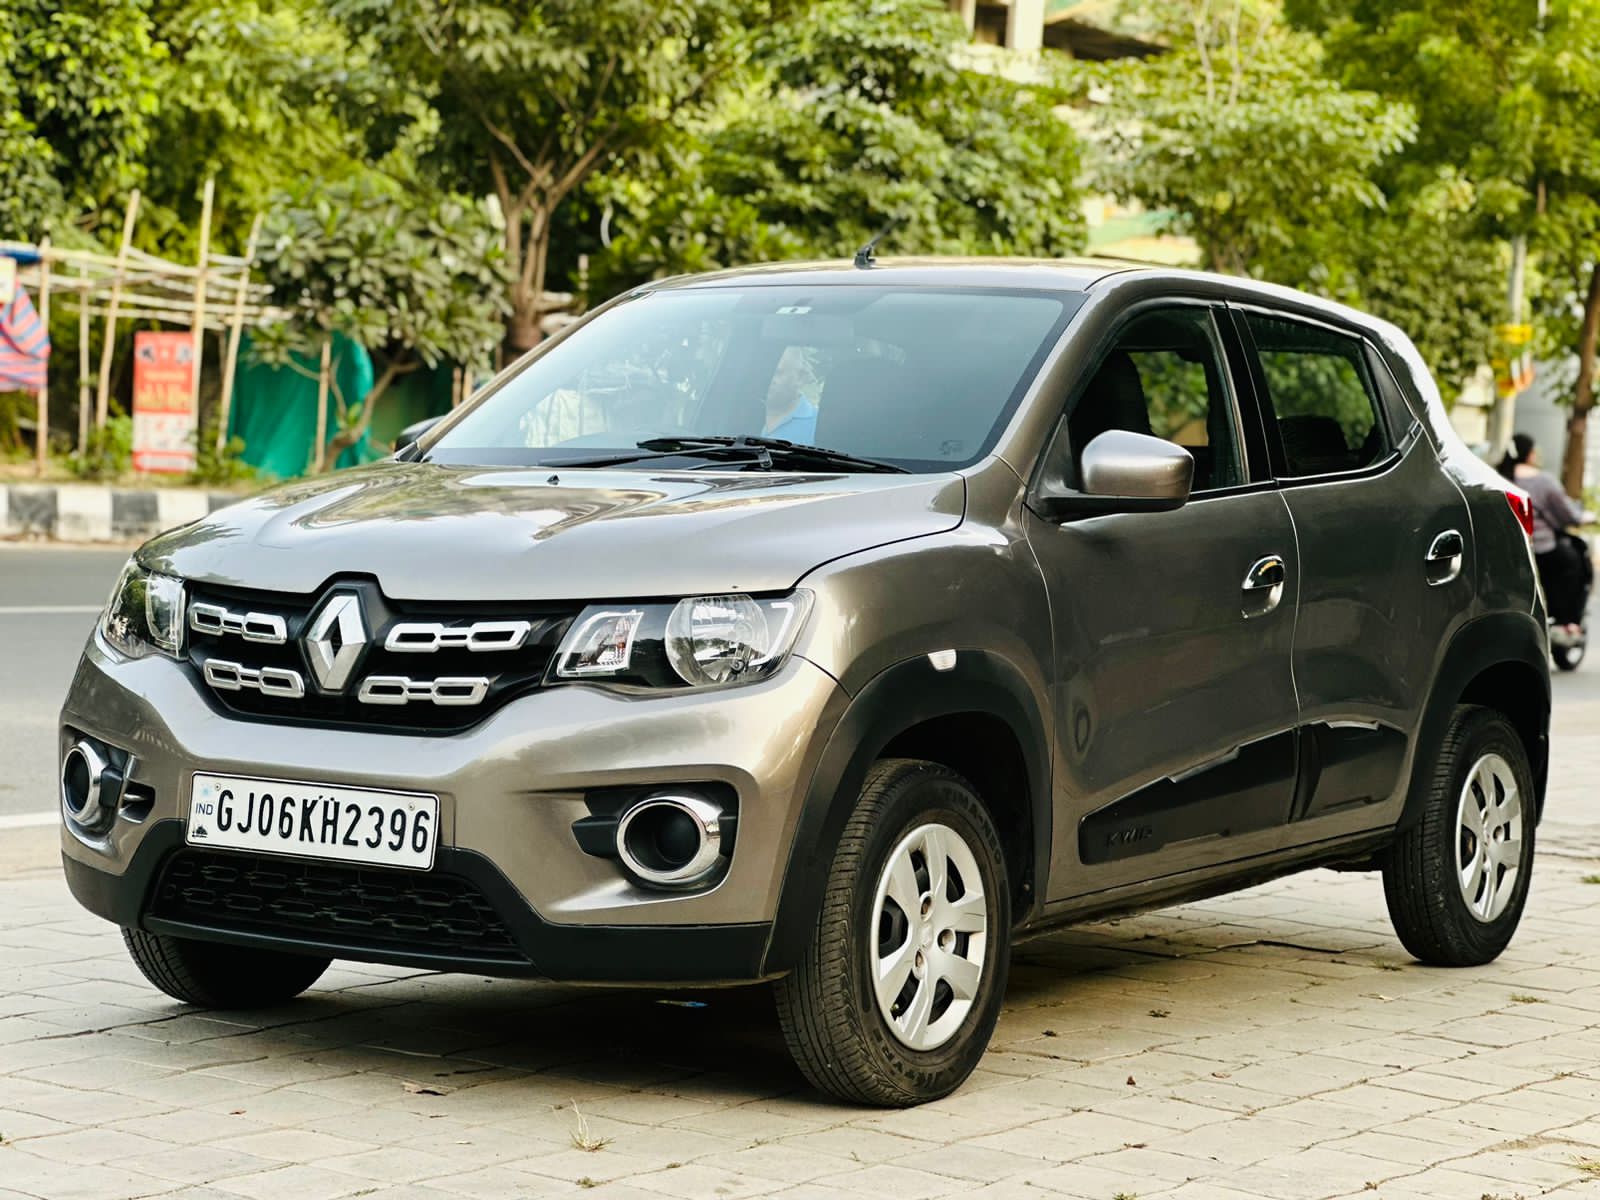 Details View - Renault KWID photos - reseller,reseller marketplace,advetising your products,reseller bazzar,resellerbazzar.in,india's classified site,Renault KWID , used Renault KWID , old Renault KWID , old Renault KWID  in Vadodara , Renault KWID  in Vadodara